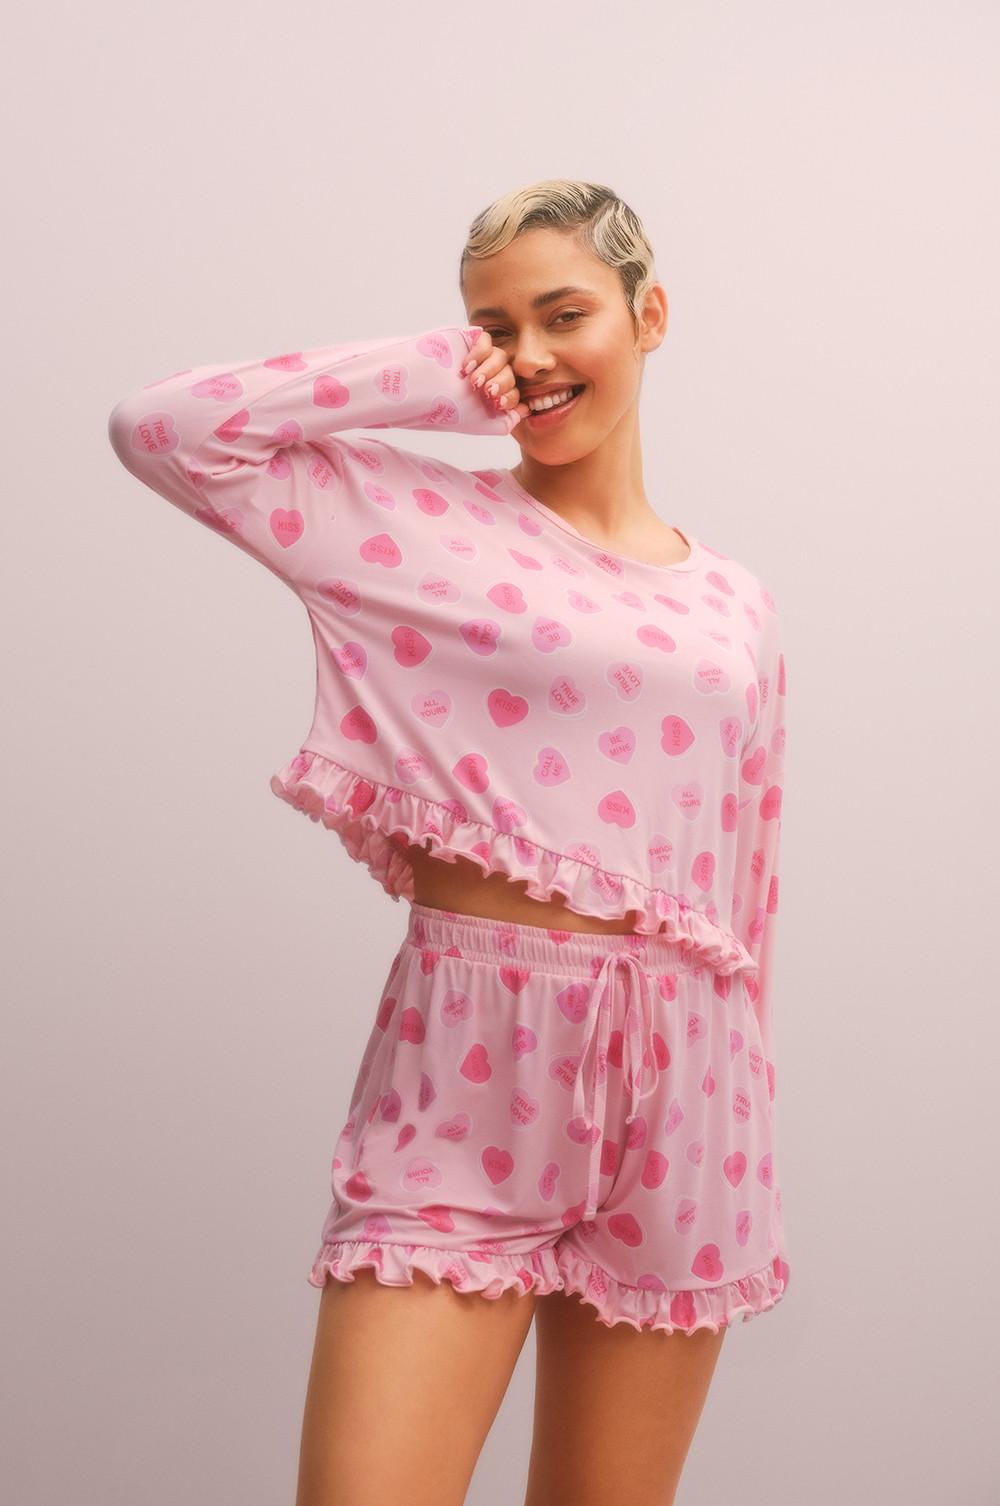 Matching Pyjamas & Lingerie Sets for Valentines Day